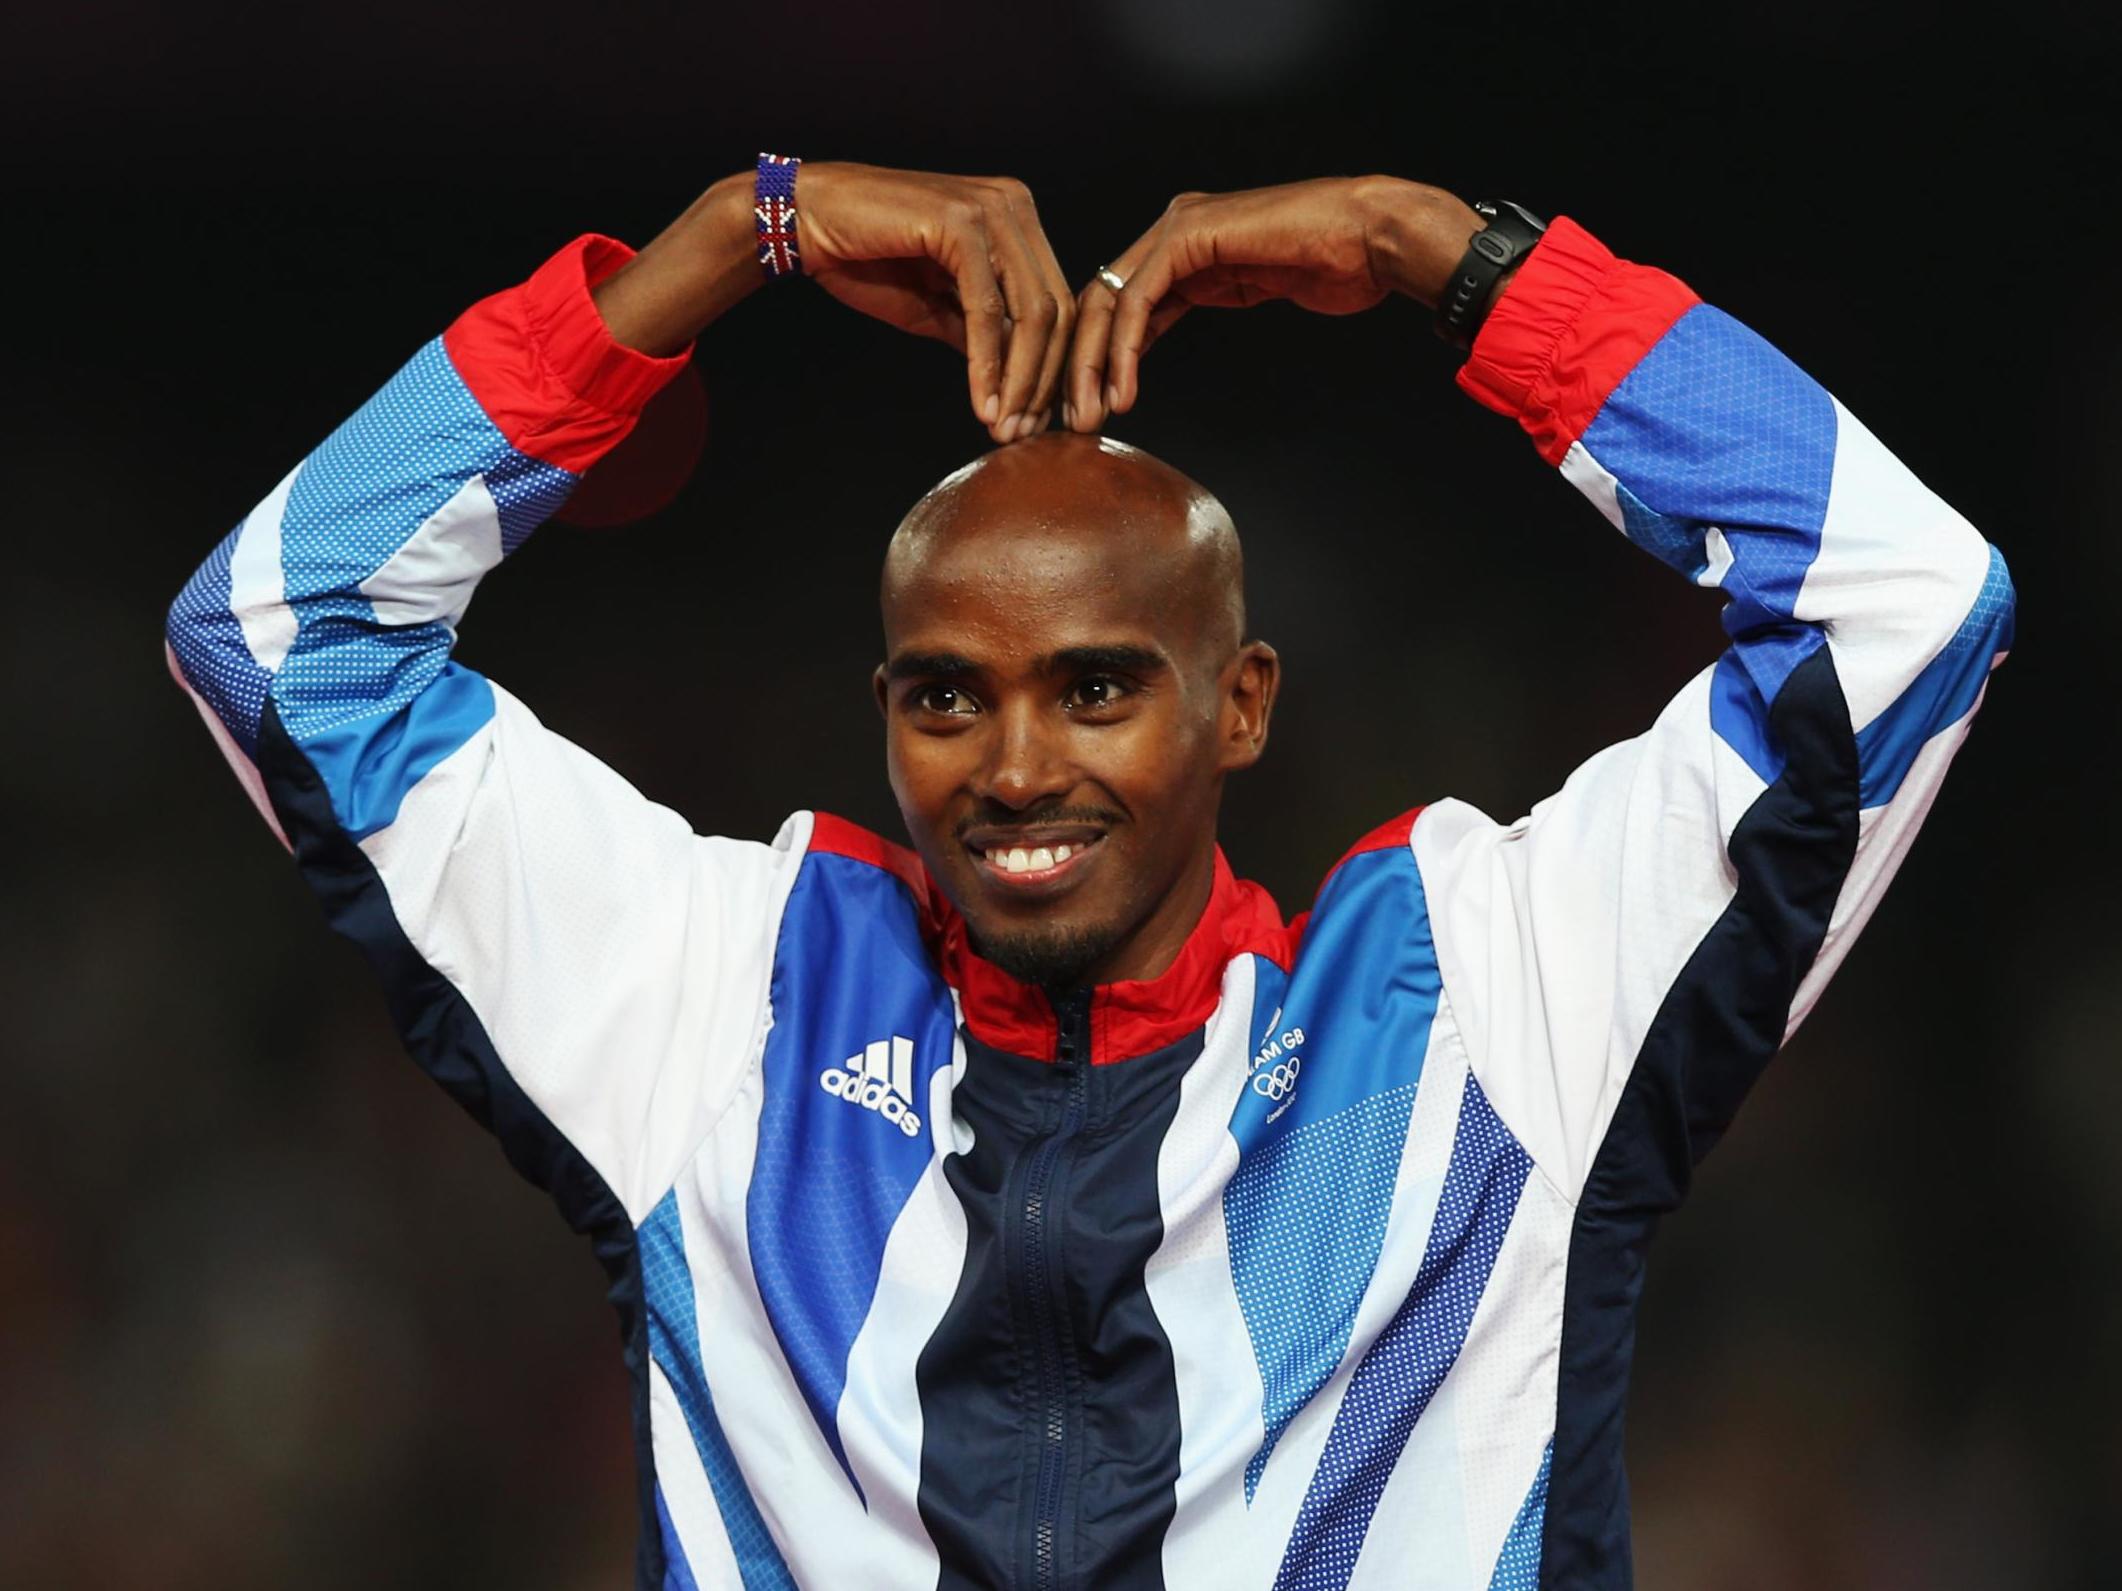 Gold medalist Mohamed Farah of Great Britain celebrates on the podium during the medal ceremony for the Men's 5000m on Day 15 of the London 2012 Olympic Games at Olympic Stadium on August 11, 2012 in London, England